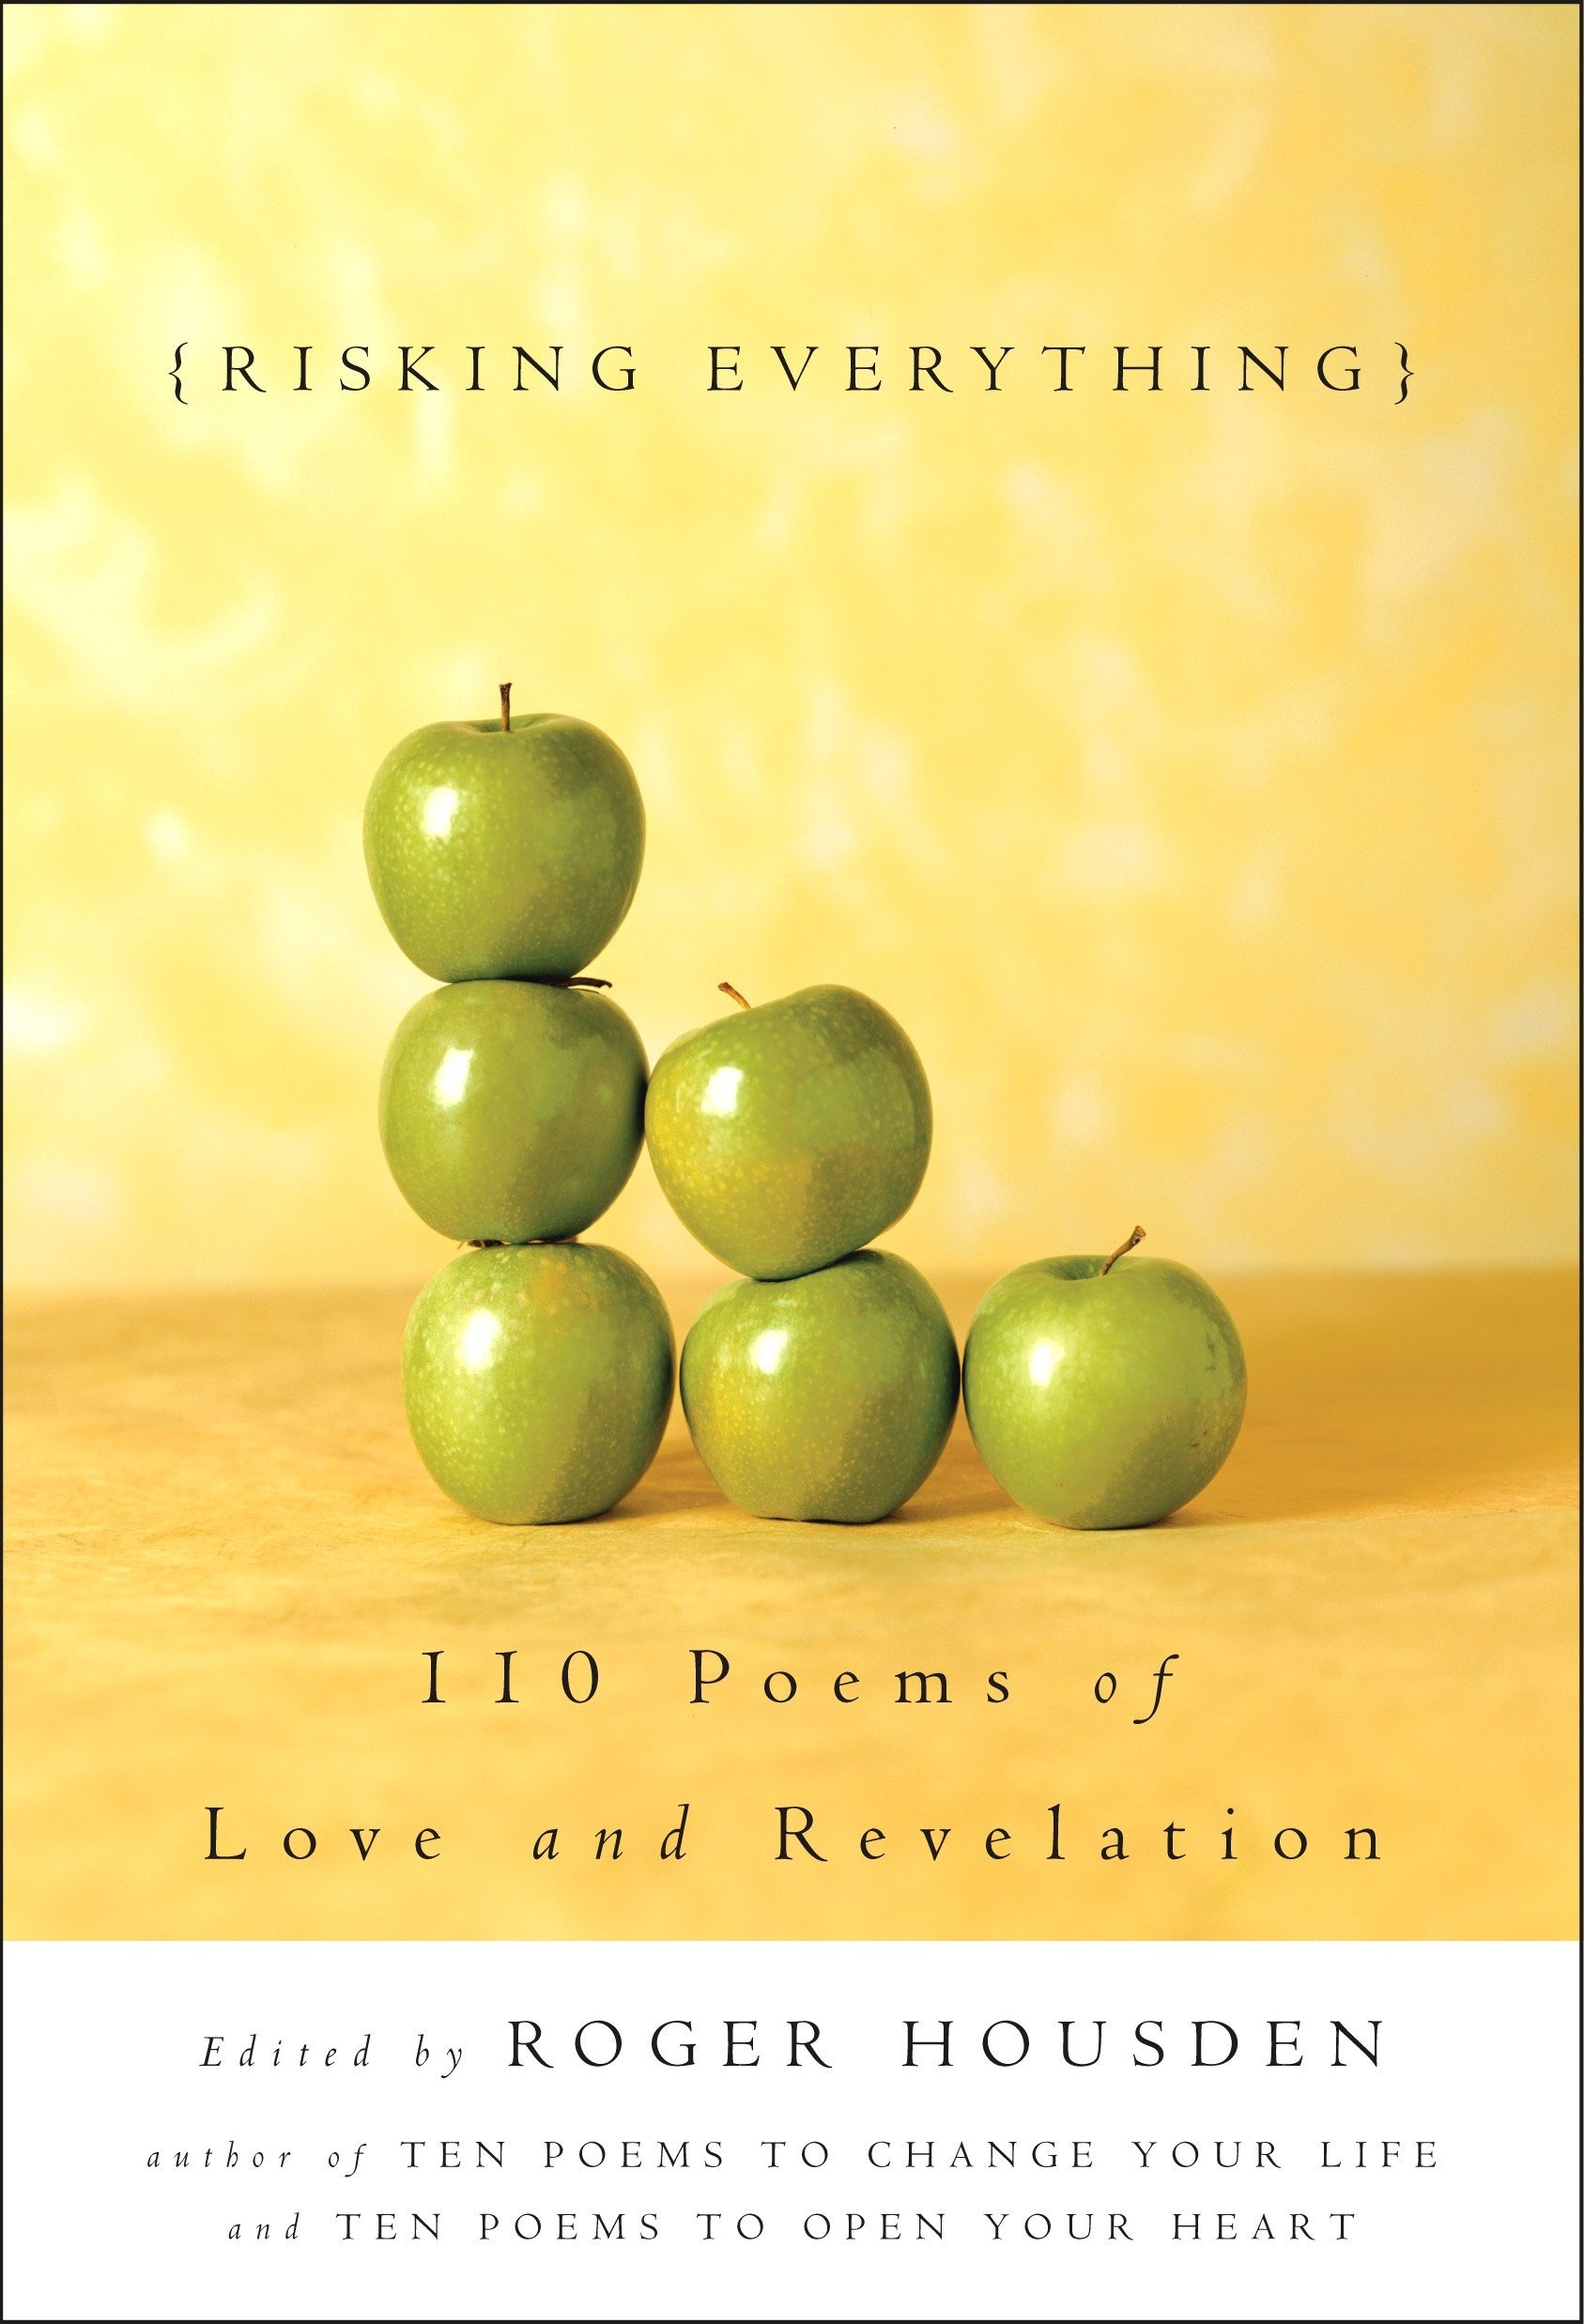 'Risking Everything: 110 Poems of Love and Revelation'